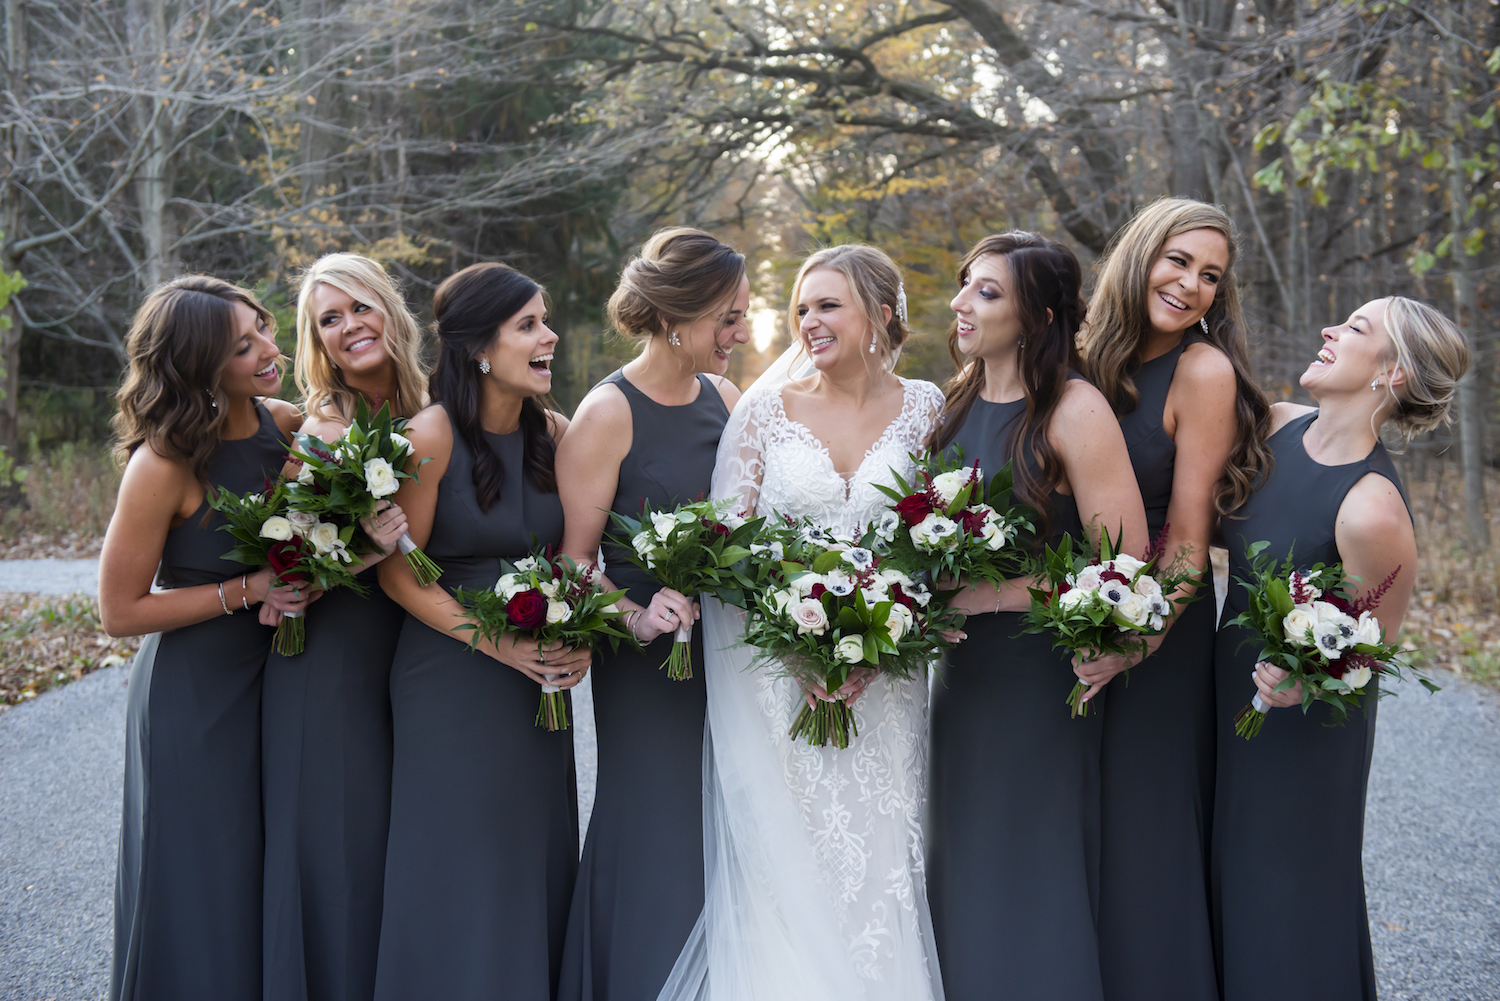 Bride and bridesmaids laughing